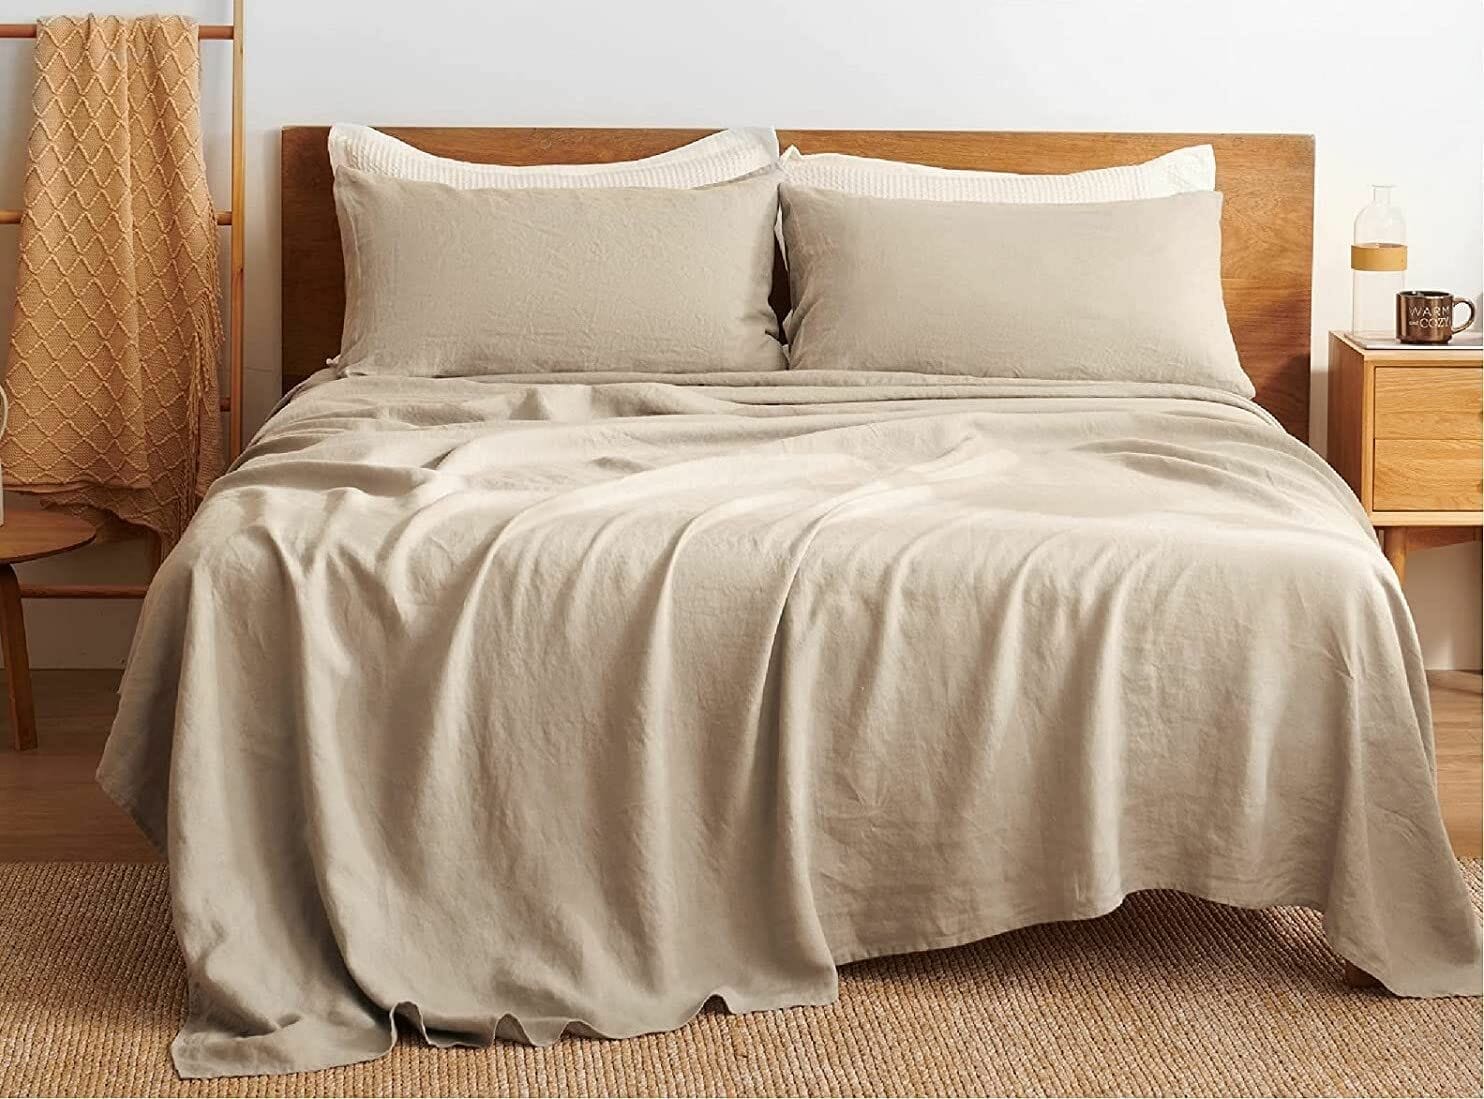 What’s the Best Quality Bedding For You?